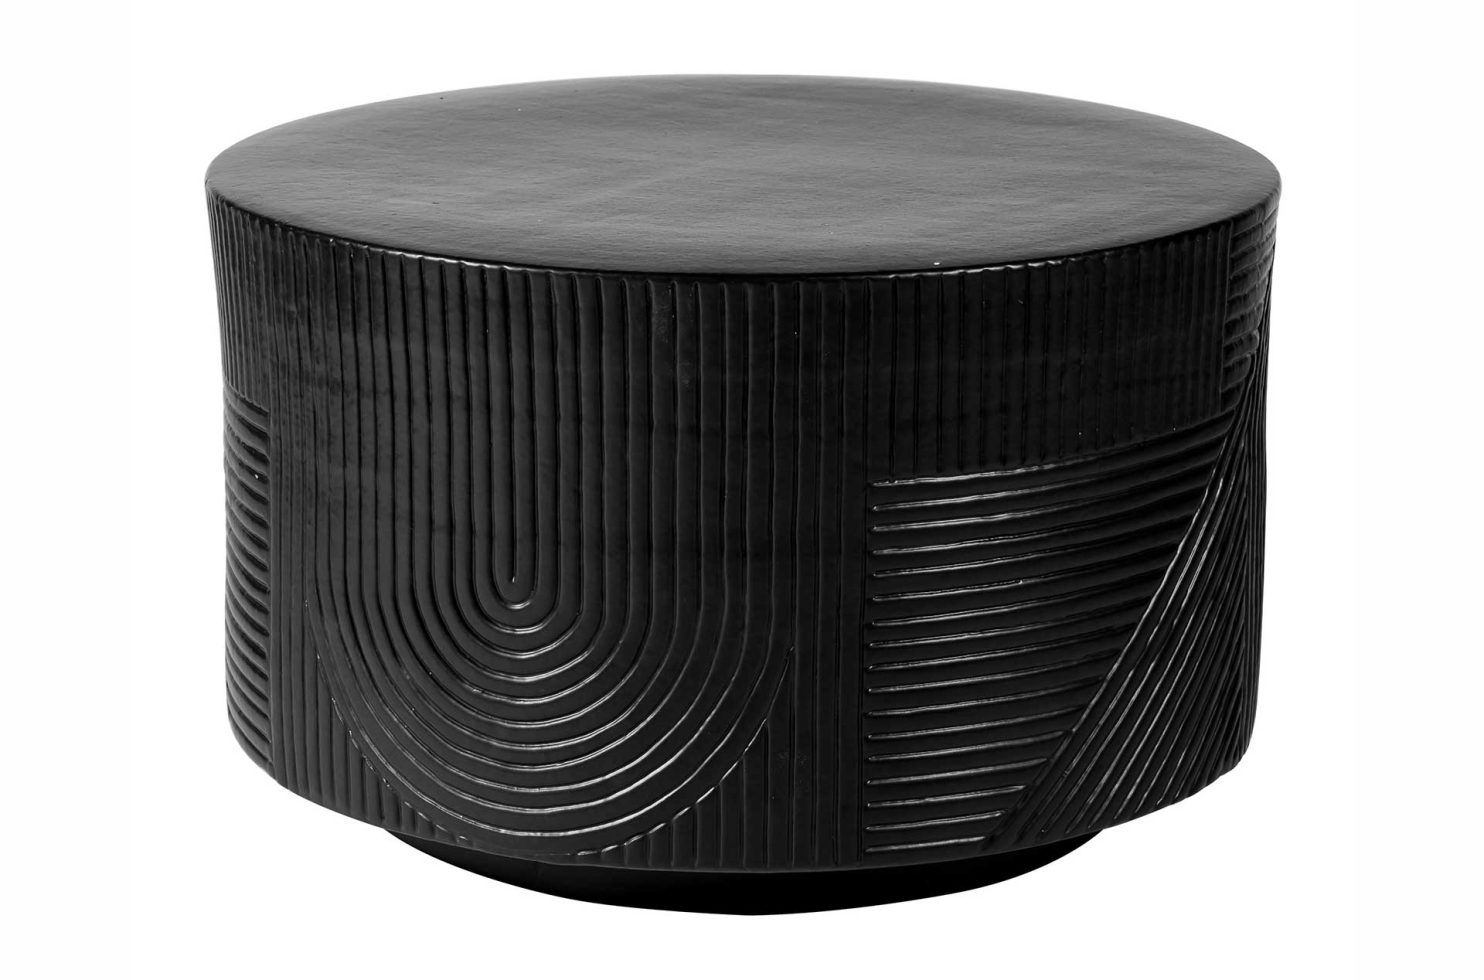 prov cer serenity textured round table 24in C30891432 coal 4 web